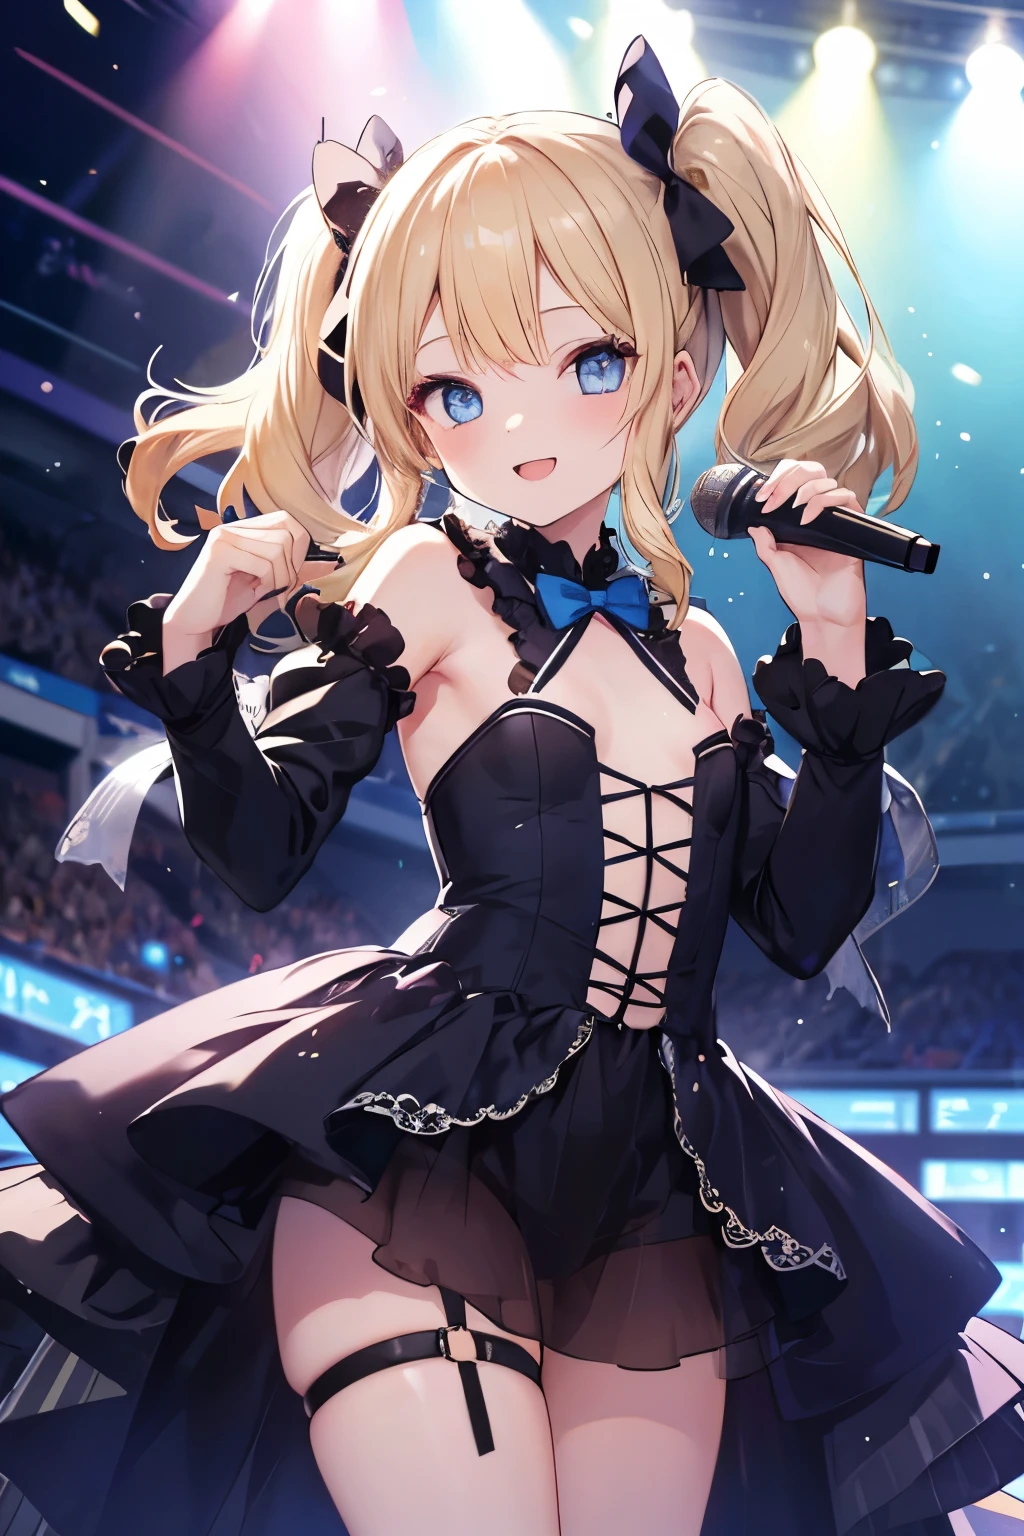 Blonde、Blue Eyes、girl、Small breasts、Twin tails、girl、Small breasts、Lolita、Bright smile、Looks about 15 years old、Petan Musume、He is short、目のhighlight、Sexy thighs、Idol、Sing with a microphone、Mine-based costumes、Your eyes are so beautiful、highlight